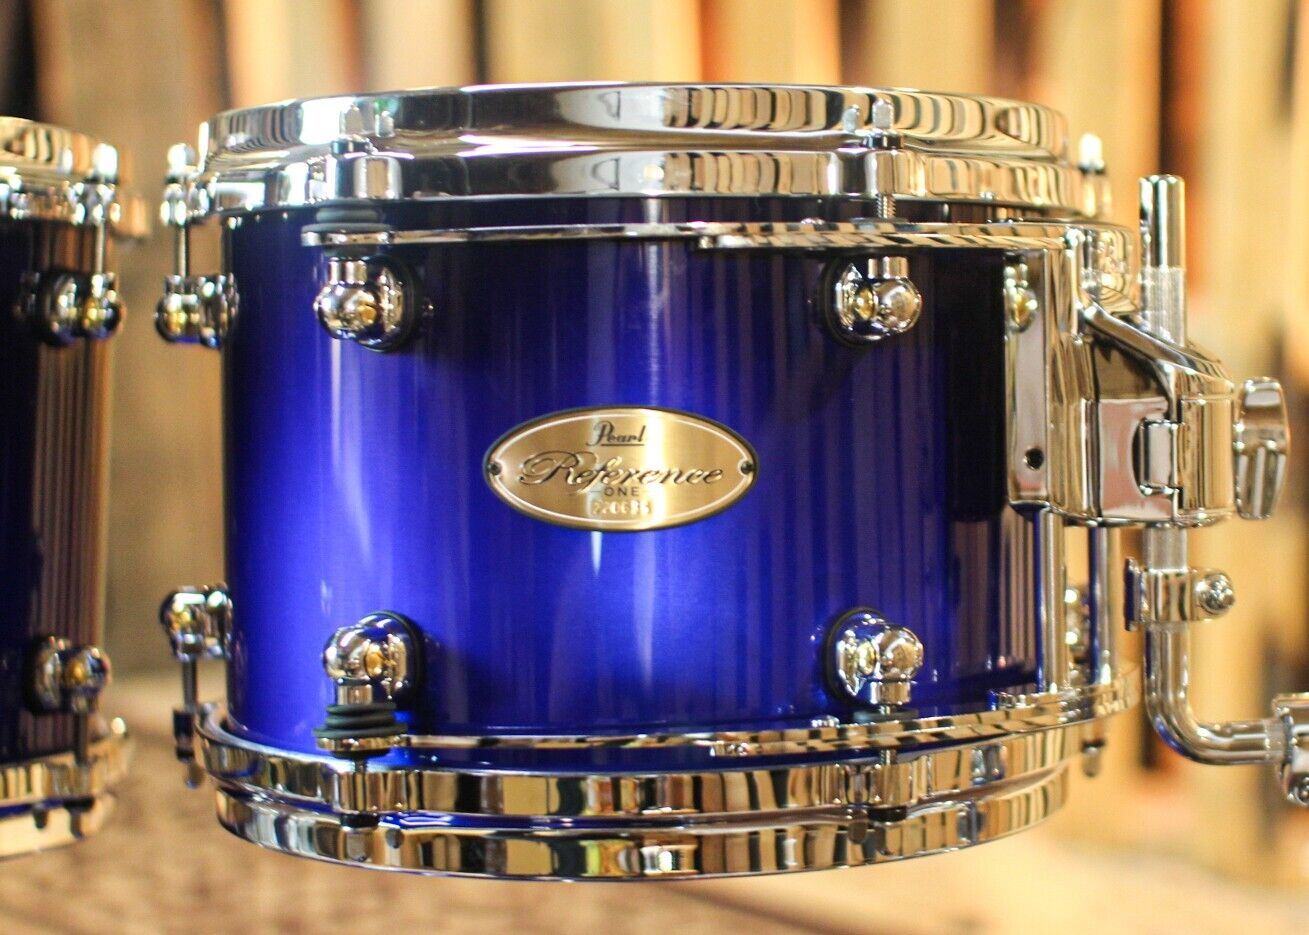 Pearl Reference One Kobalt Blue Fade Metallic Lacquer Drum Set – 22,10,12,16 4